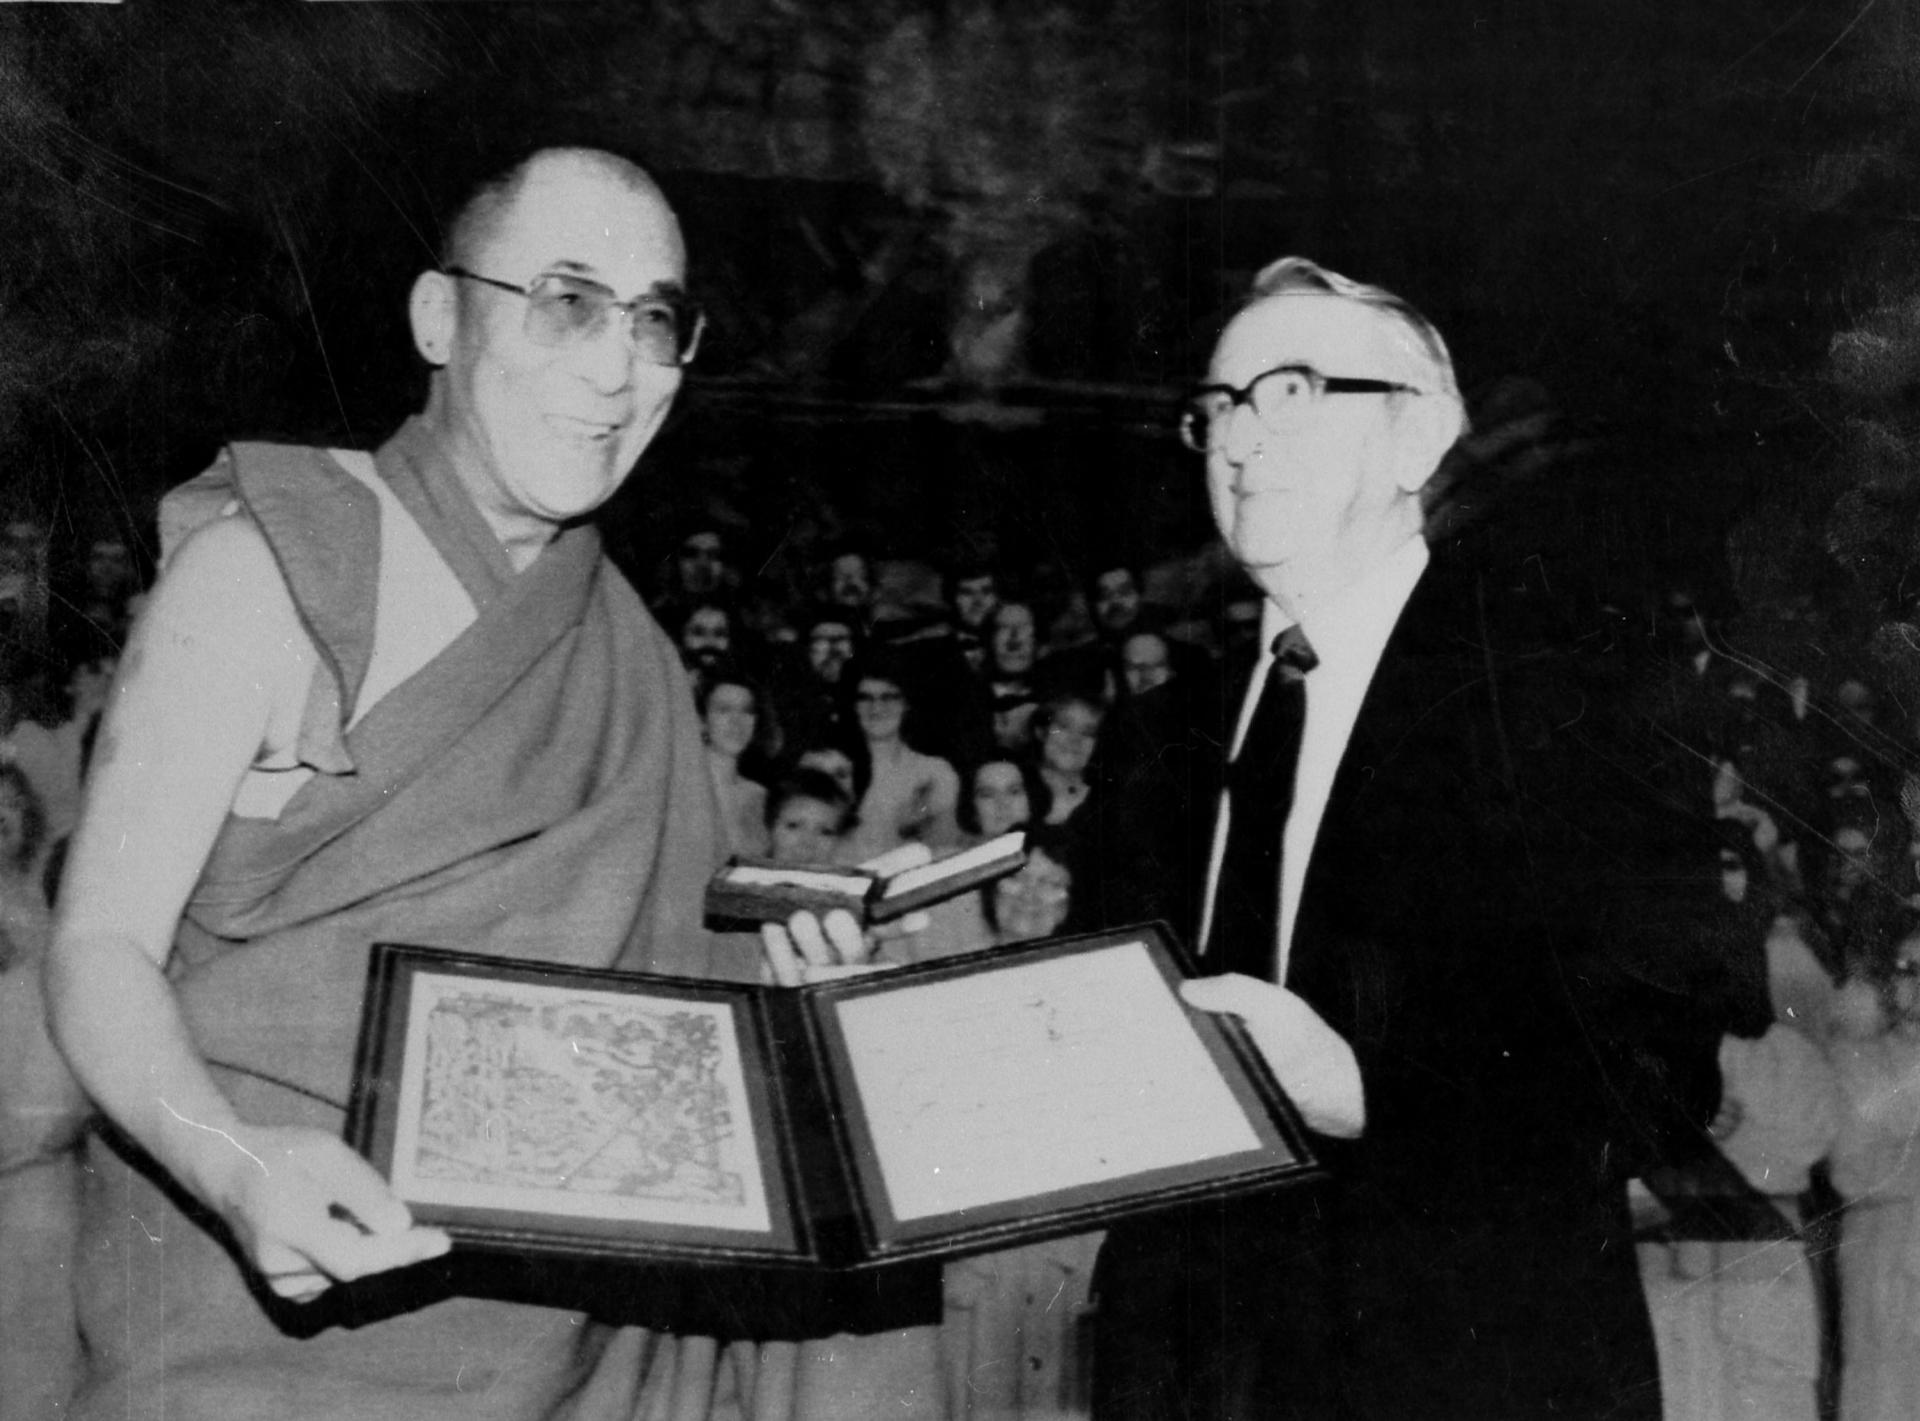 The Dalai Lama holds the Nobel Peace prize in a black and white photograph